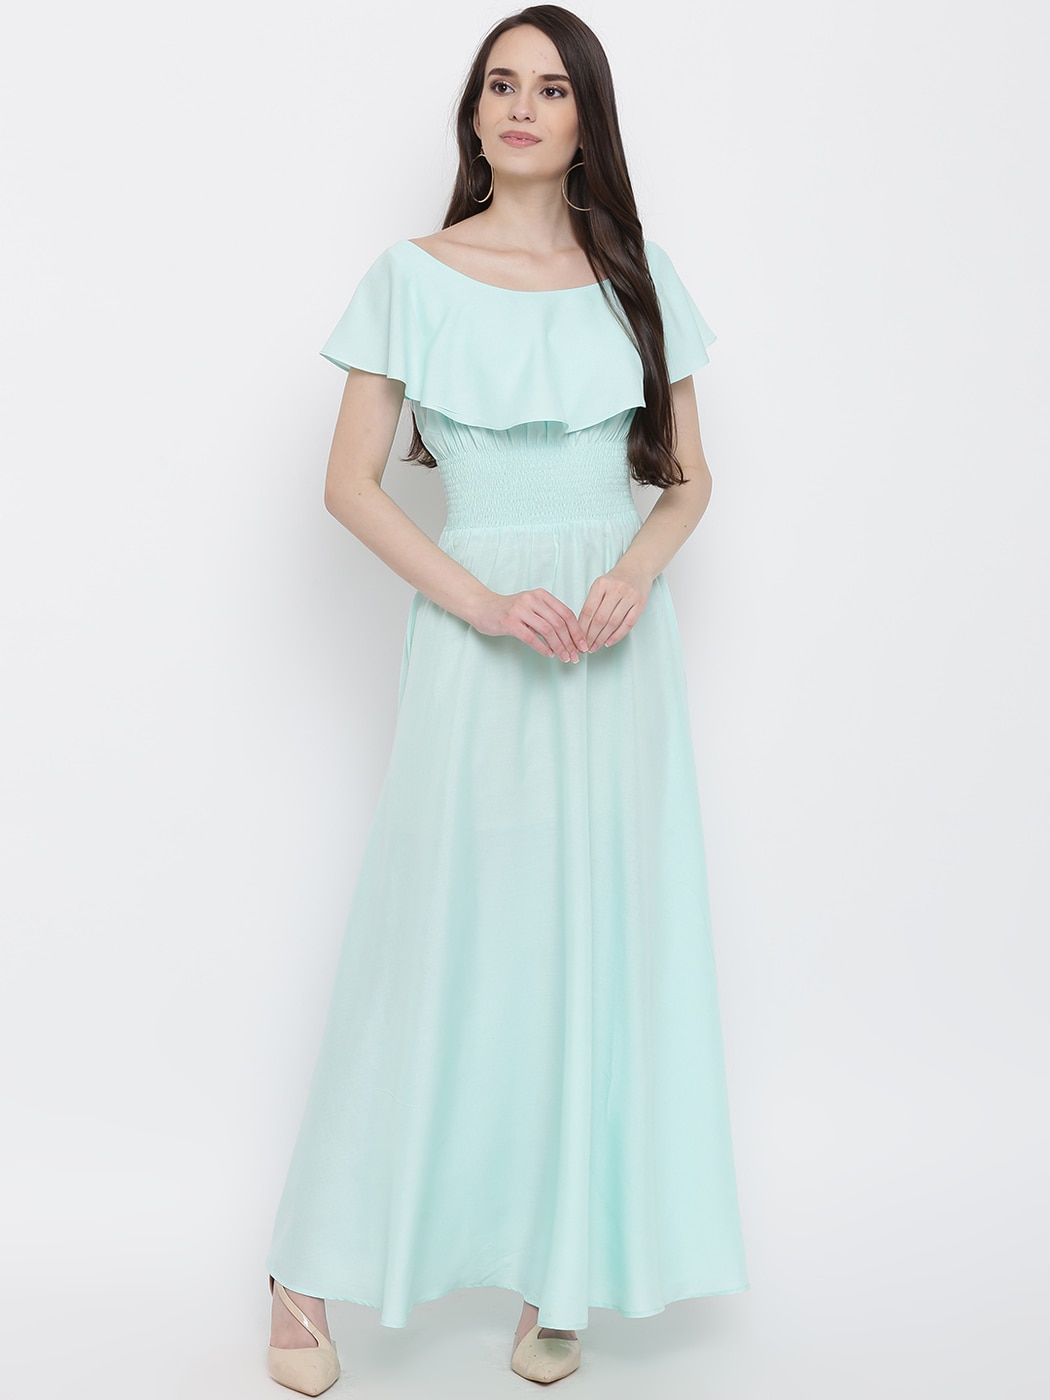 Light blue ruffled dress with belt by Siddhi Creation | The Secret Label